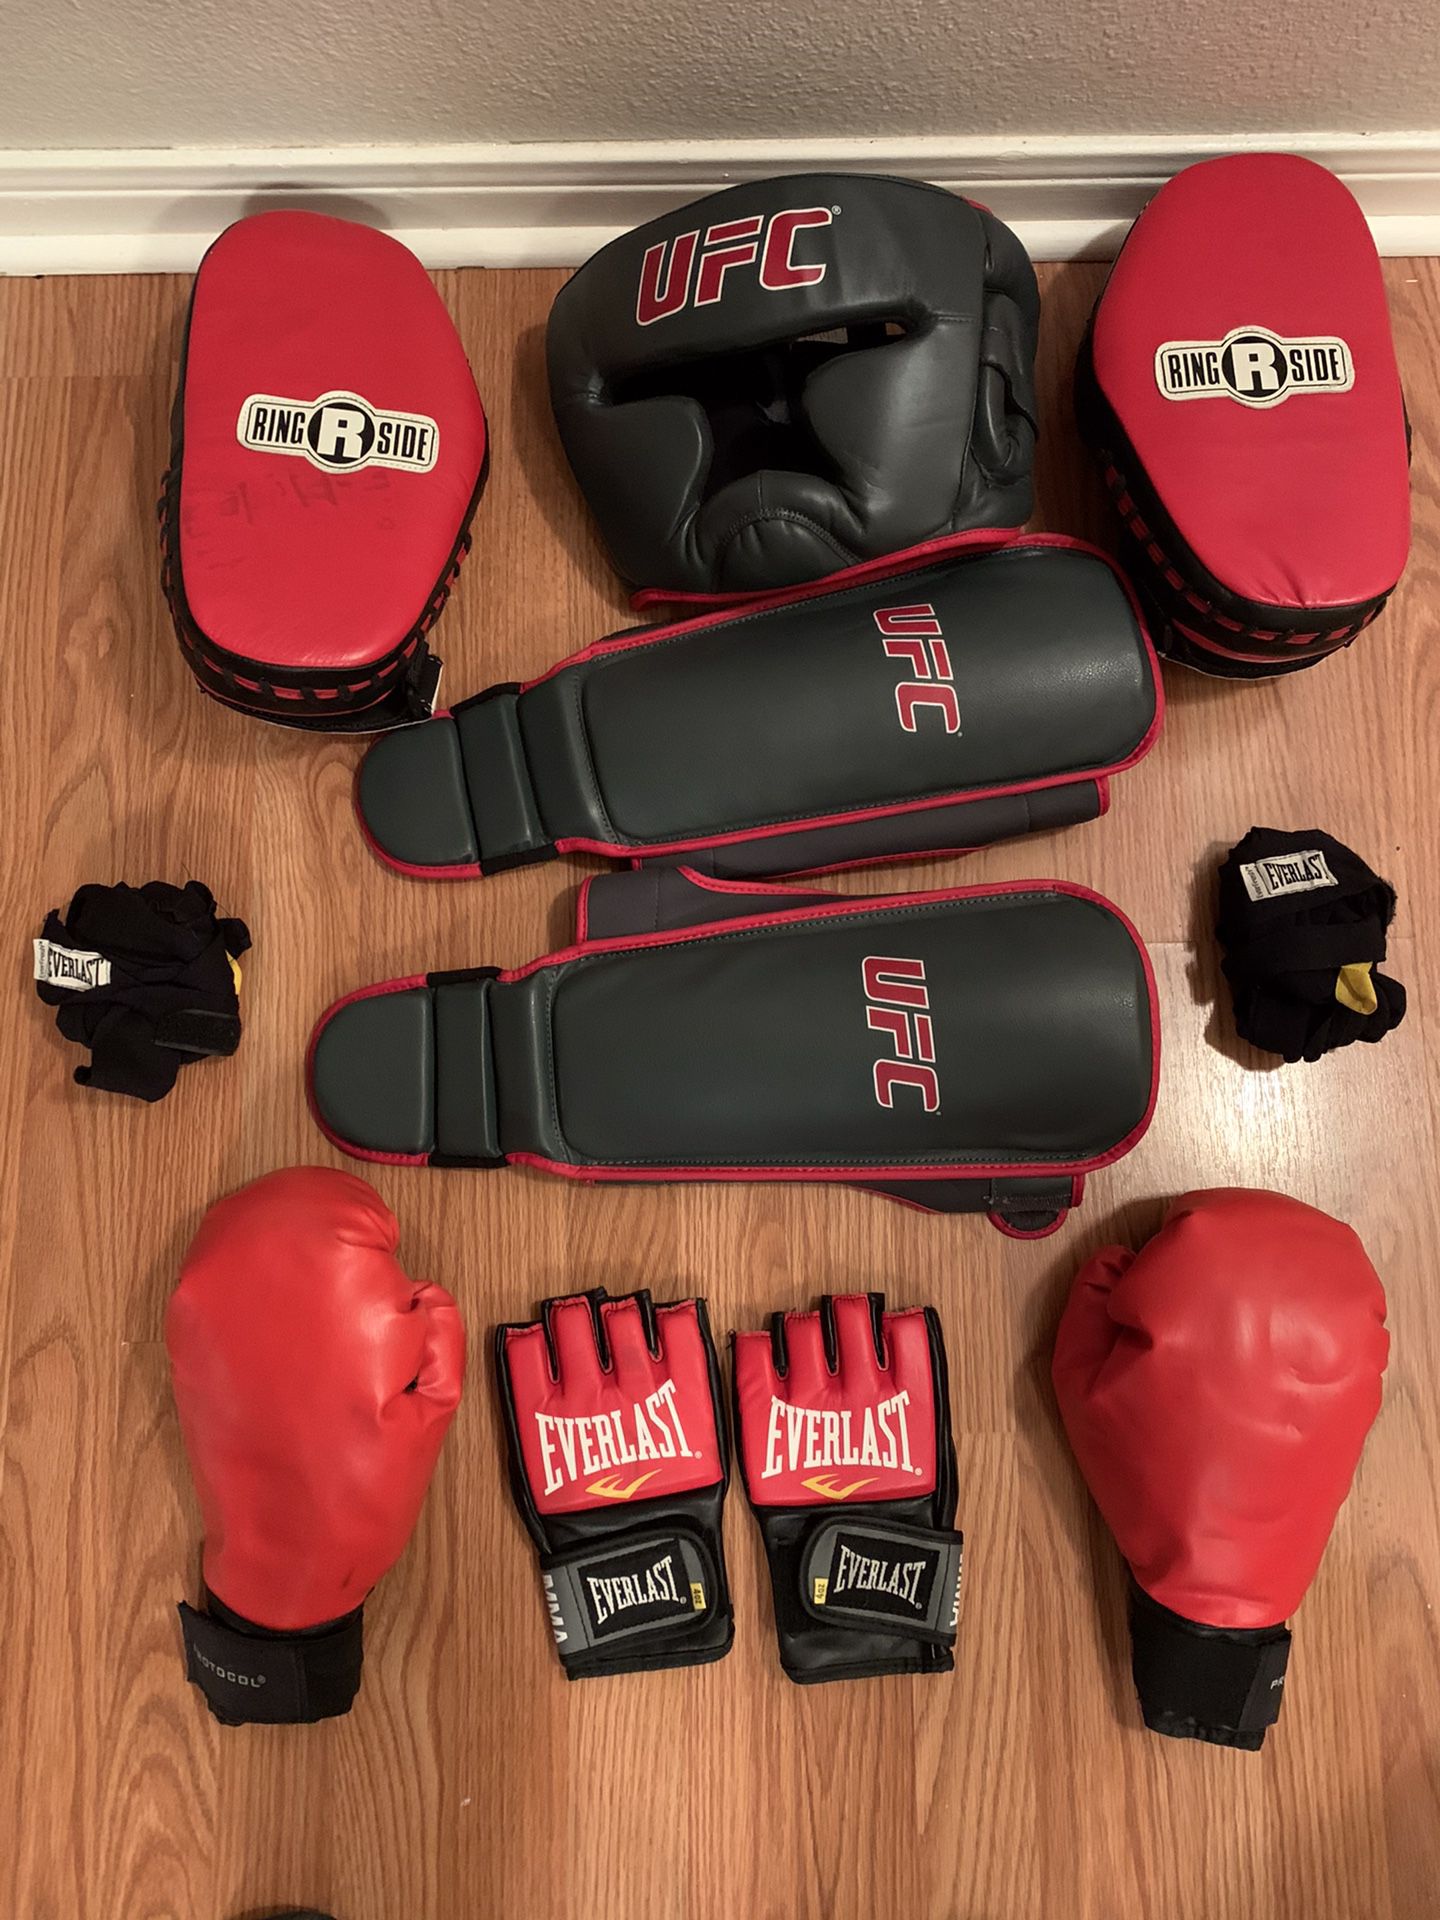 Everlast and UFC MMA training gear s/m adult size